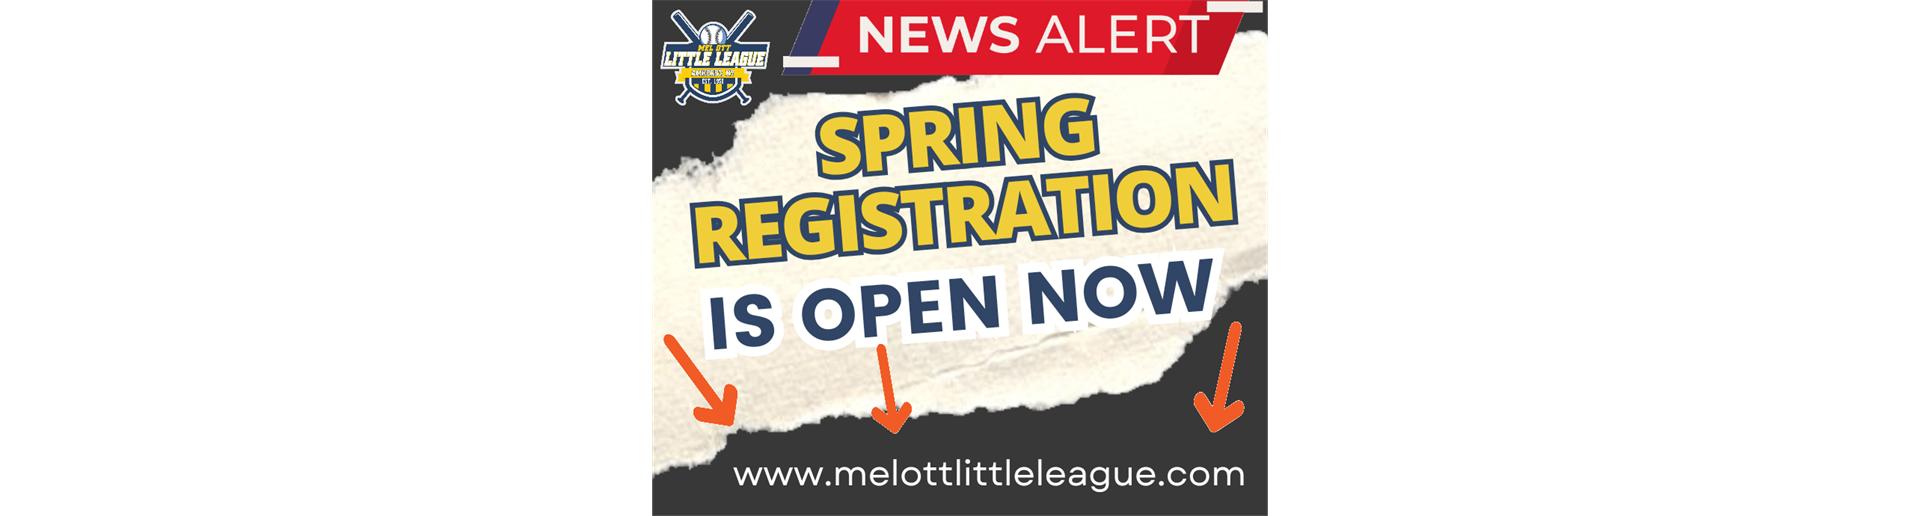 Spring Registration is OPEN NOW!